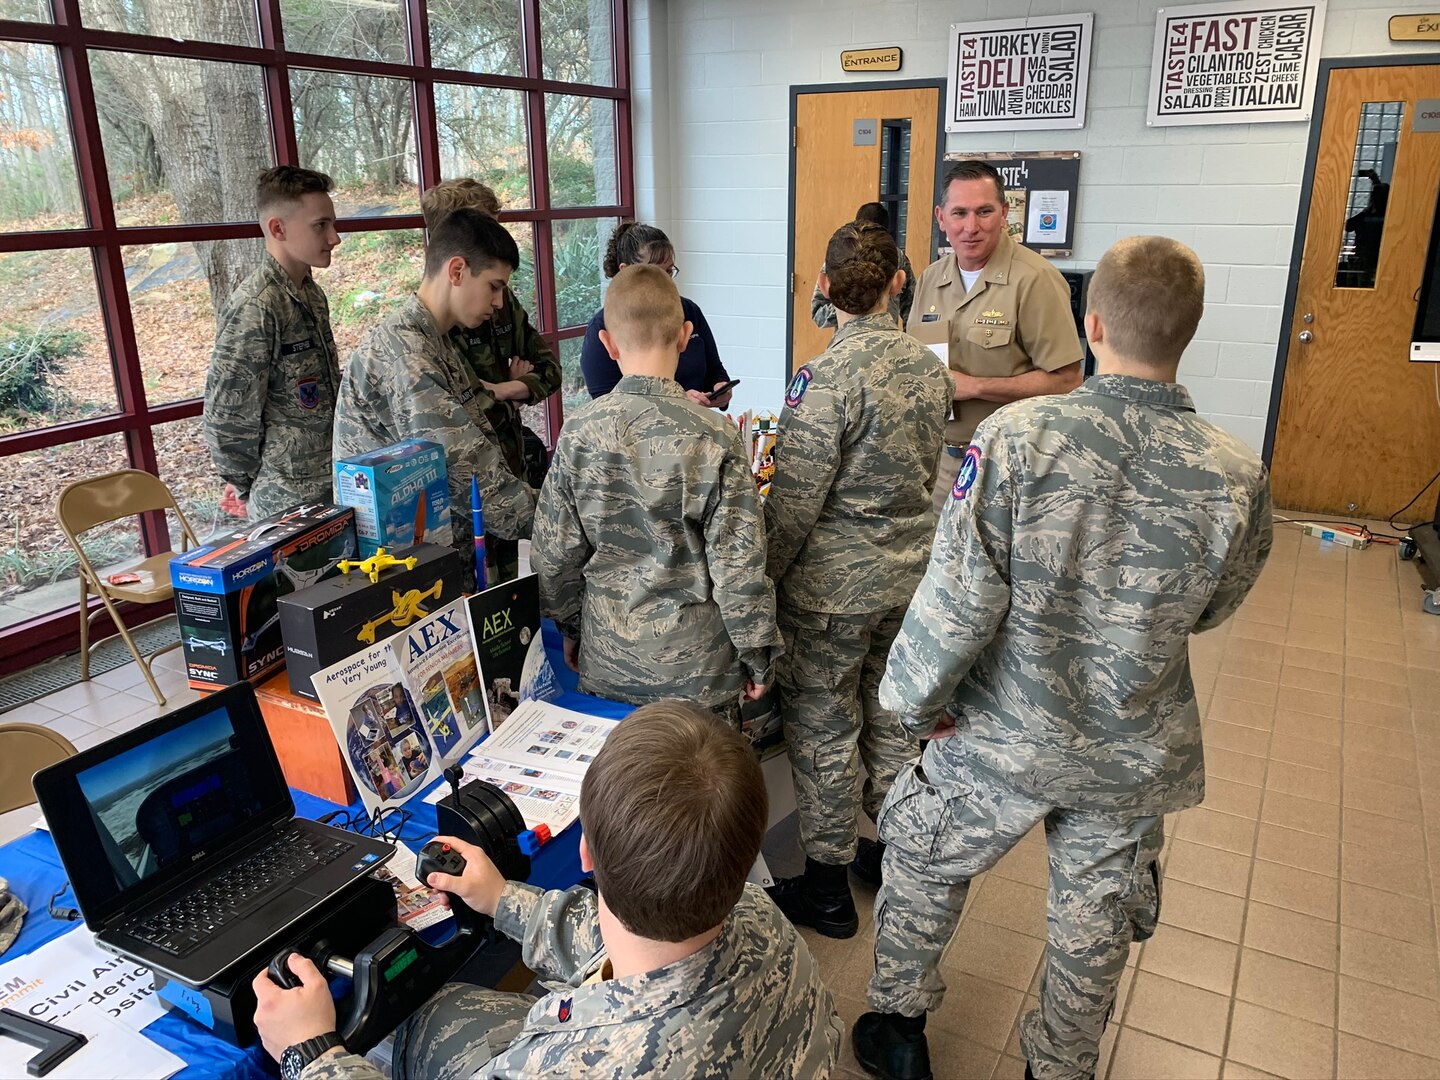 IMAGE: SPOTSYLVANIA, Va. (Feb. 29, 2020) – Capt. Casey Plew, Naval Surface Warfare Center Dahlgren Division (NSWCDD) commanding officer, speaks with students who are cadets in the Virginia Wing Civil Air Patrol at the annual science, technology, engineering, mathematics (STEM) Summit open to the public at Chancellor High School. Plew was among the NSWCDD leaders, scientists and engineers who joined a myriad of organizations to engage students with science, technology, engineering, mathematics (STEM) demonstrations. “For Patriots ages 12 and up, Civil Air Patrol is a vital force that protects Americans in need by responding to disaster, preserves the values that make our country great by developing young leaders and ensures our country's preeminence in Aerospace and Cyberspace Education,” states the organization’s website.